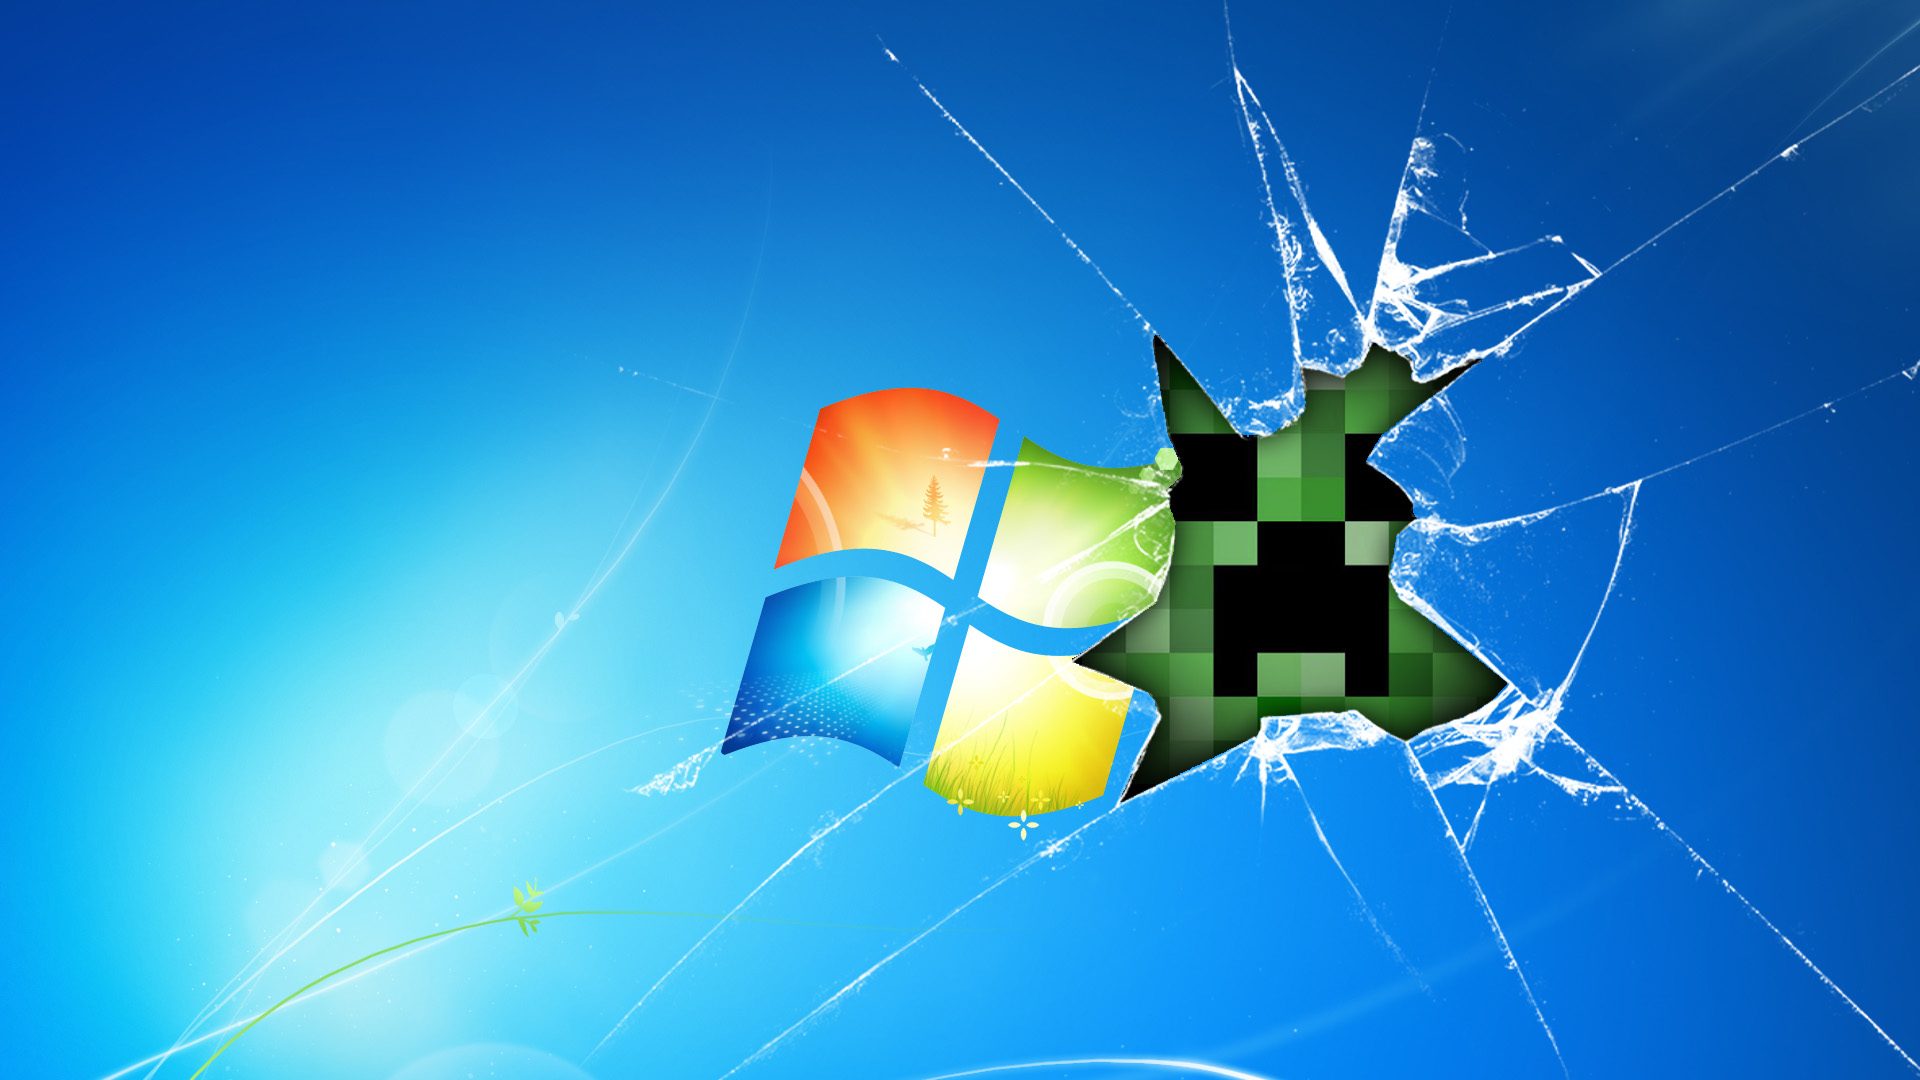 Minecraft players that use windows heres a sweet wallpaper